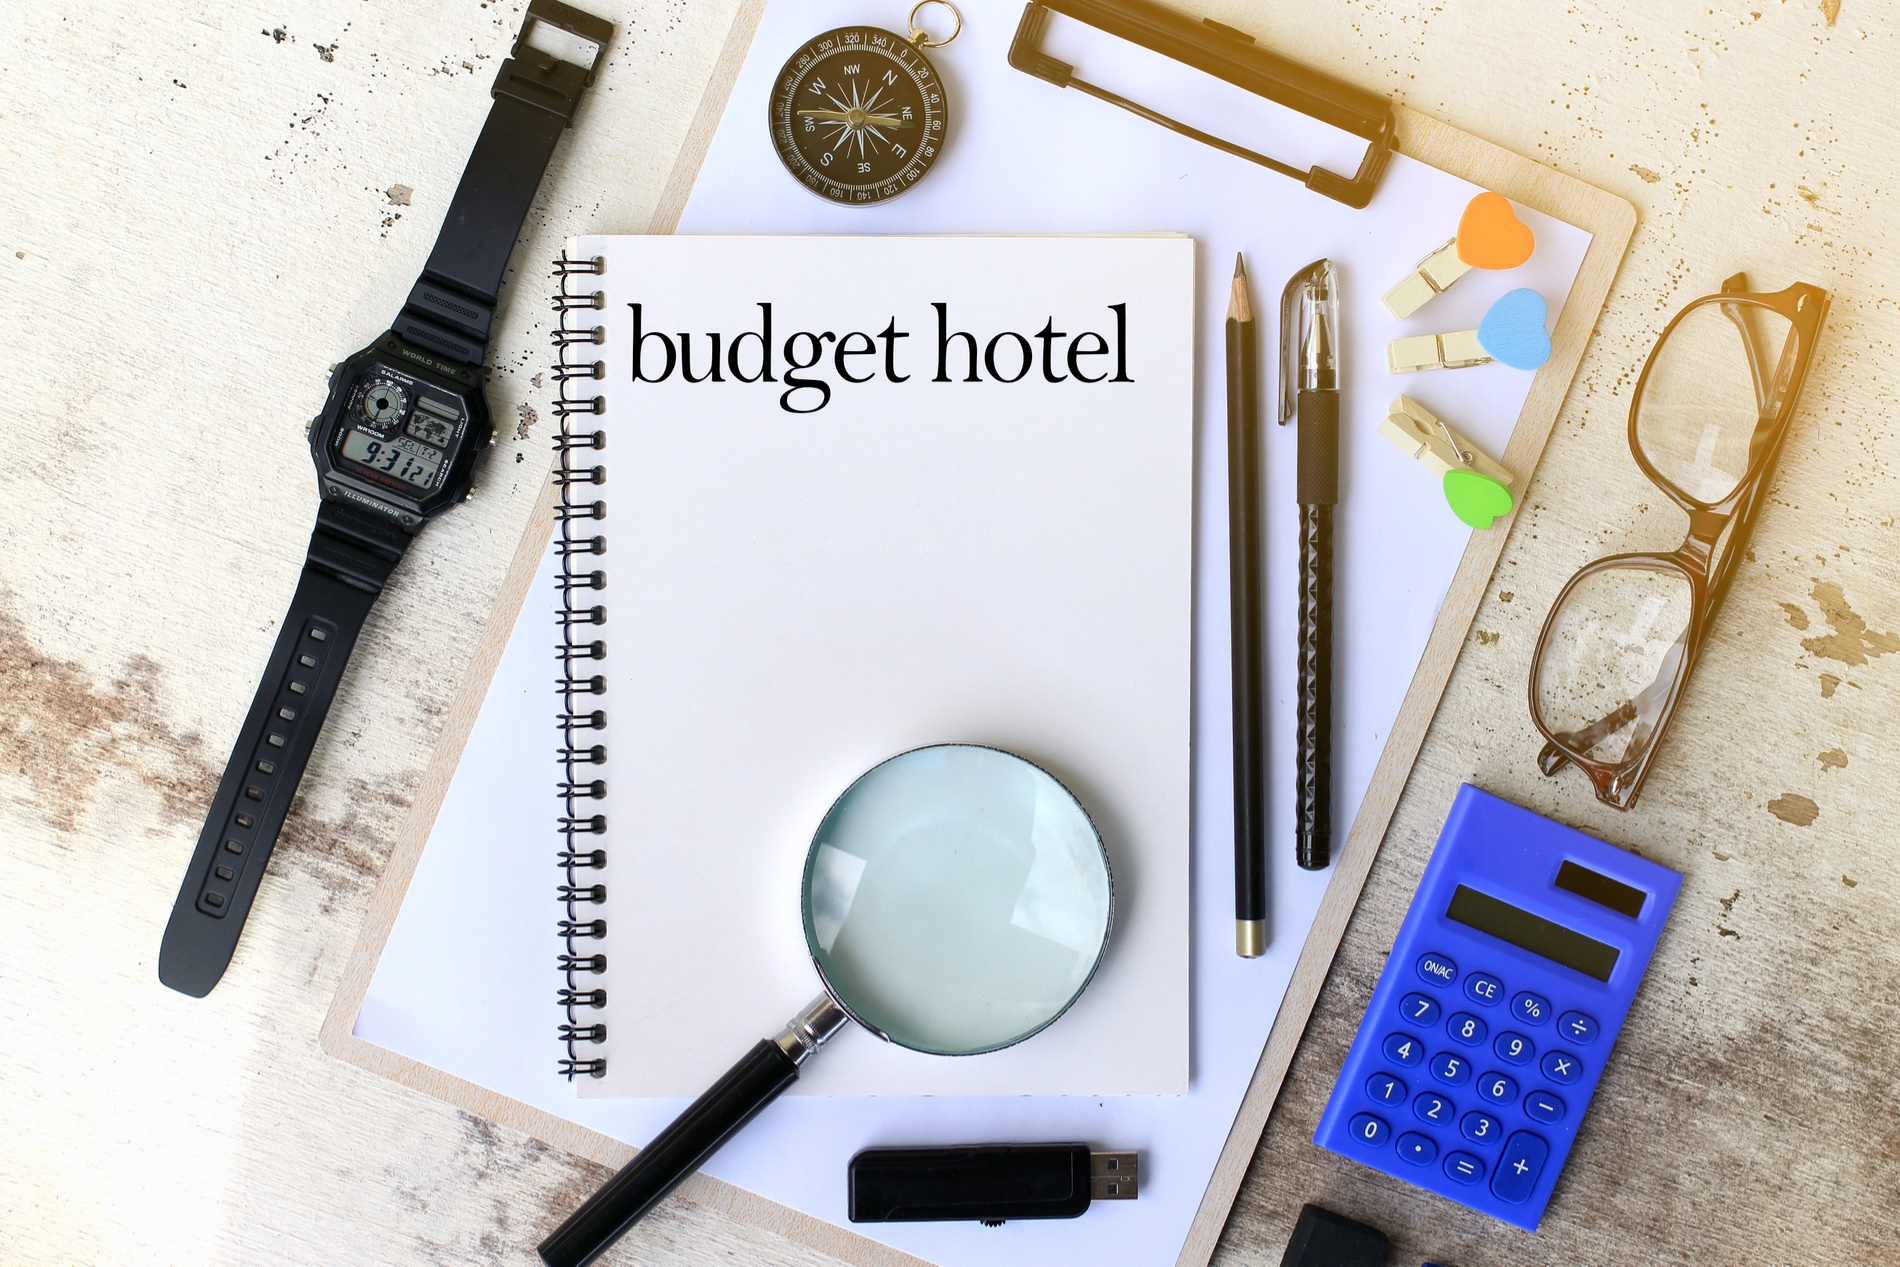 Search budget hotels